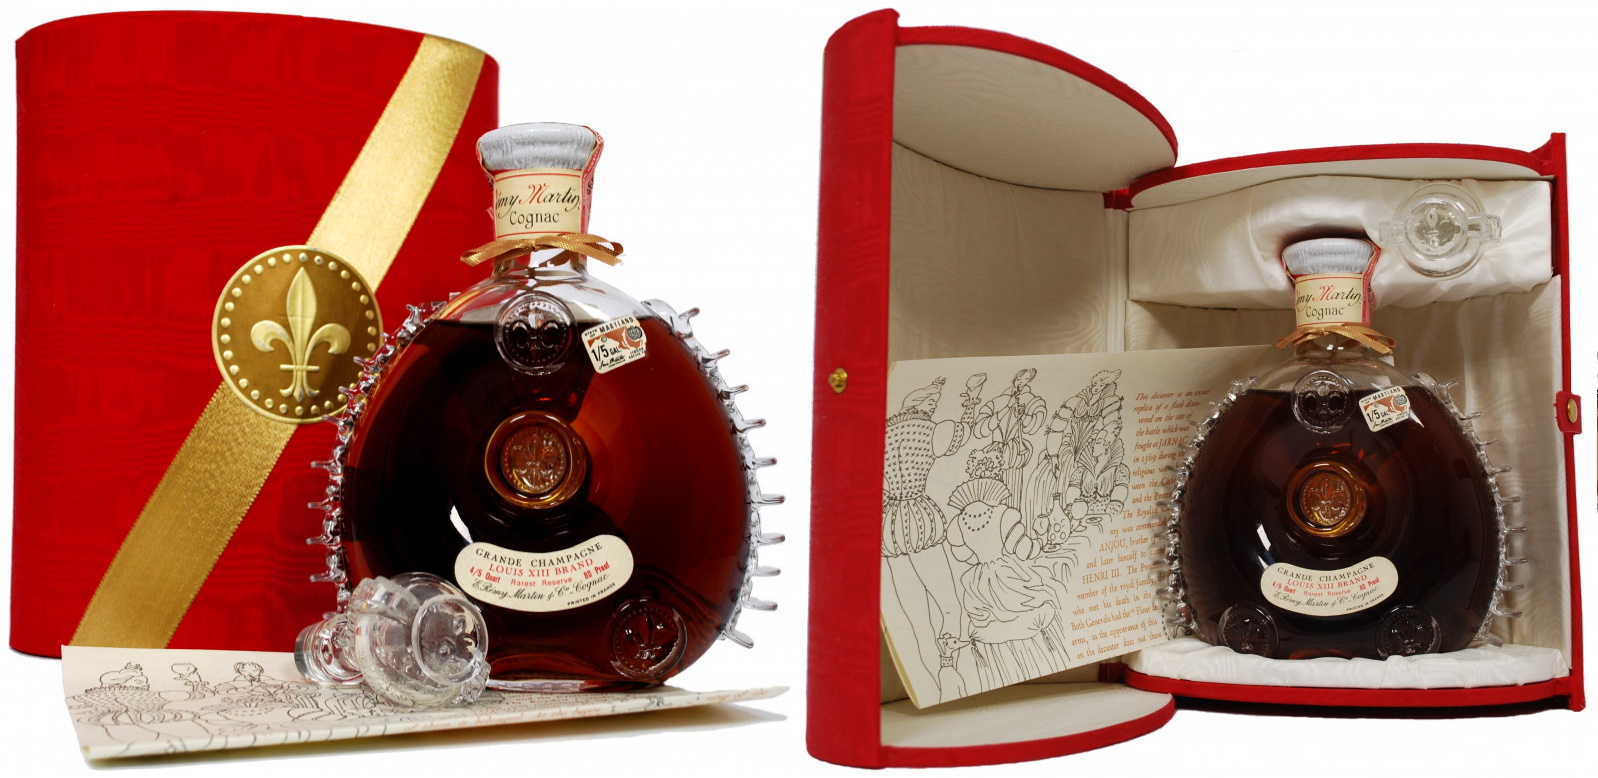 Remy Martin Cognac Louis XIII with clam-shell box